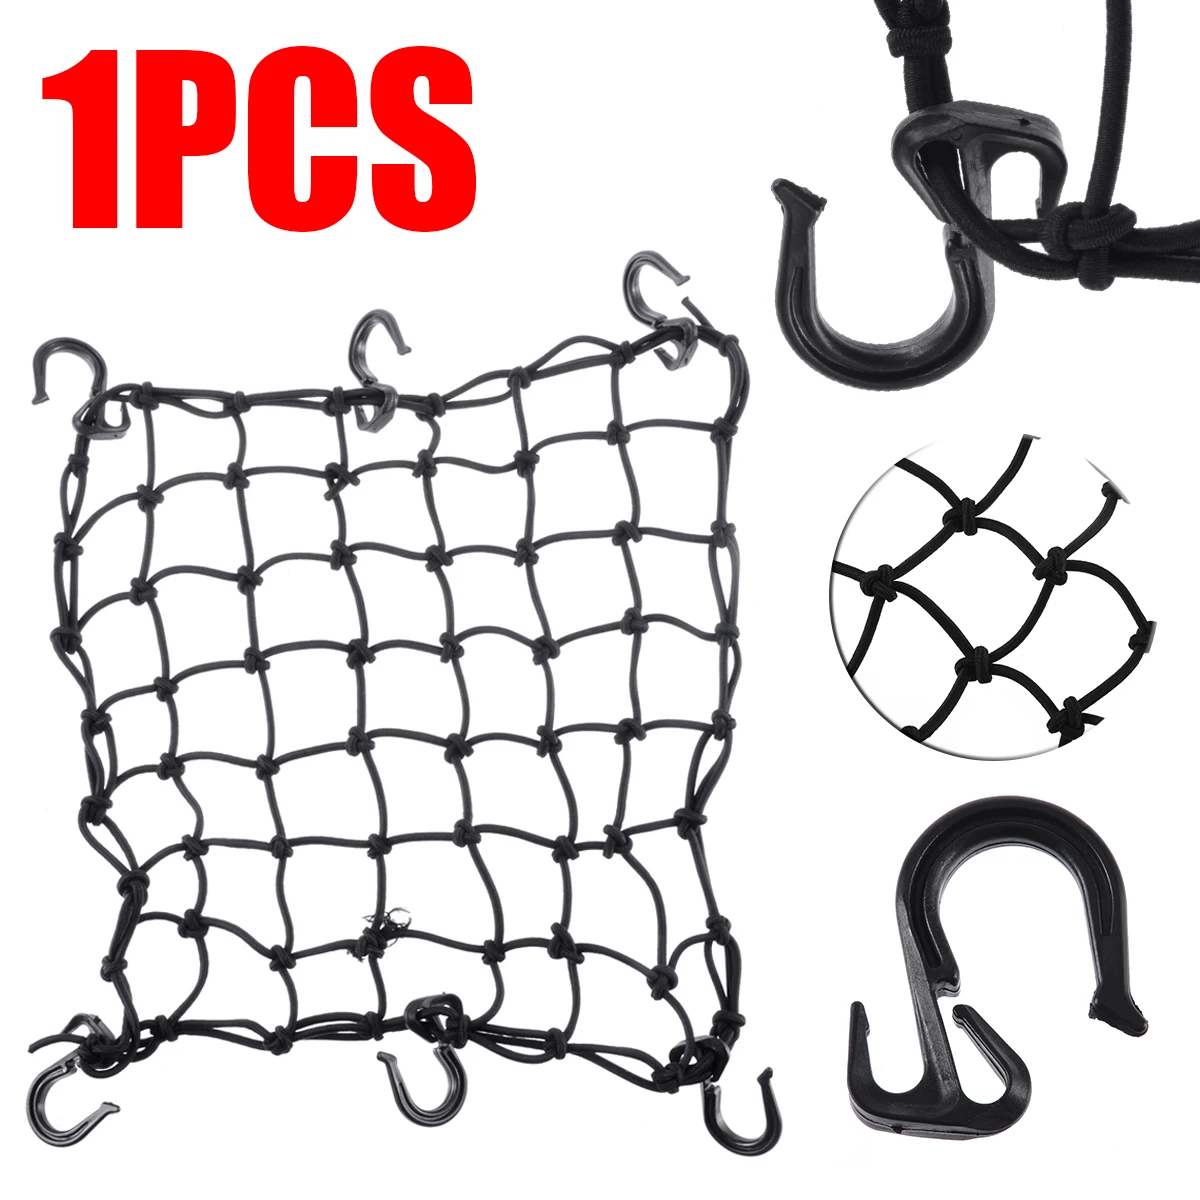 TiOODREc 42x42cm Latex Cargo Net Featuring 6 Adjustable Hooks & Tight 2"x2" Mesh For Motorcycle Helmet Luggage Cargo Oil Tanker